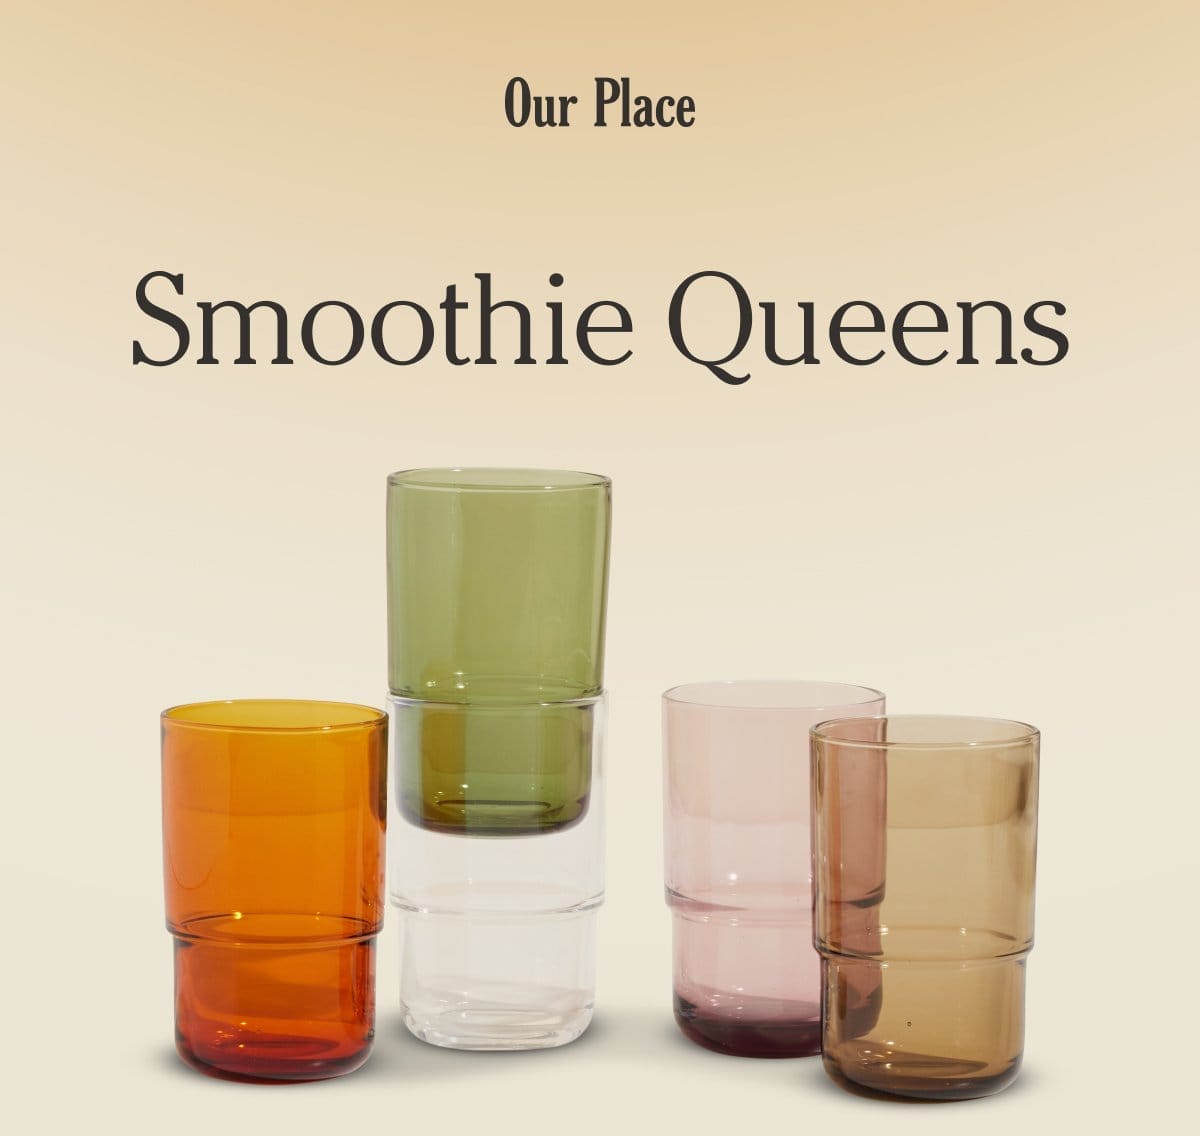 Our Place - Smoothie Queens